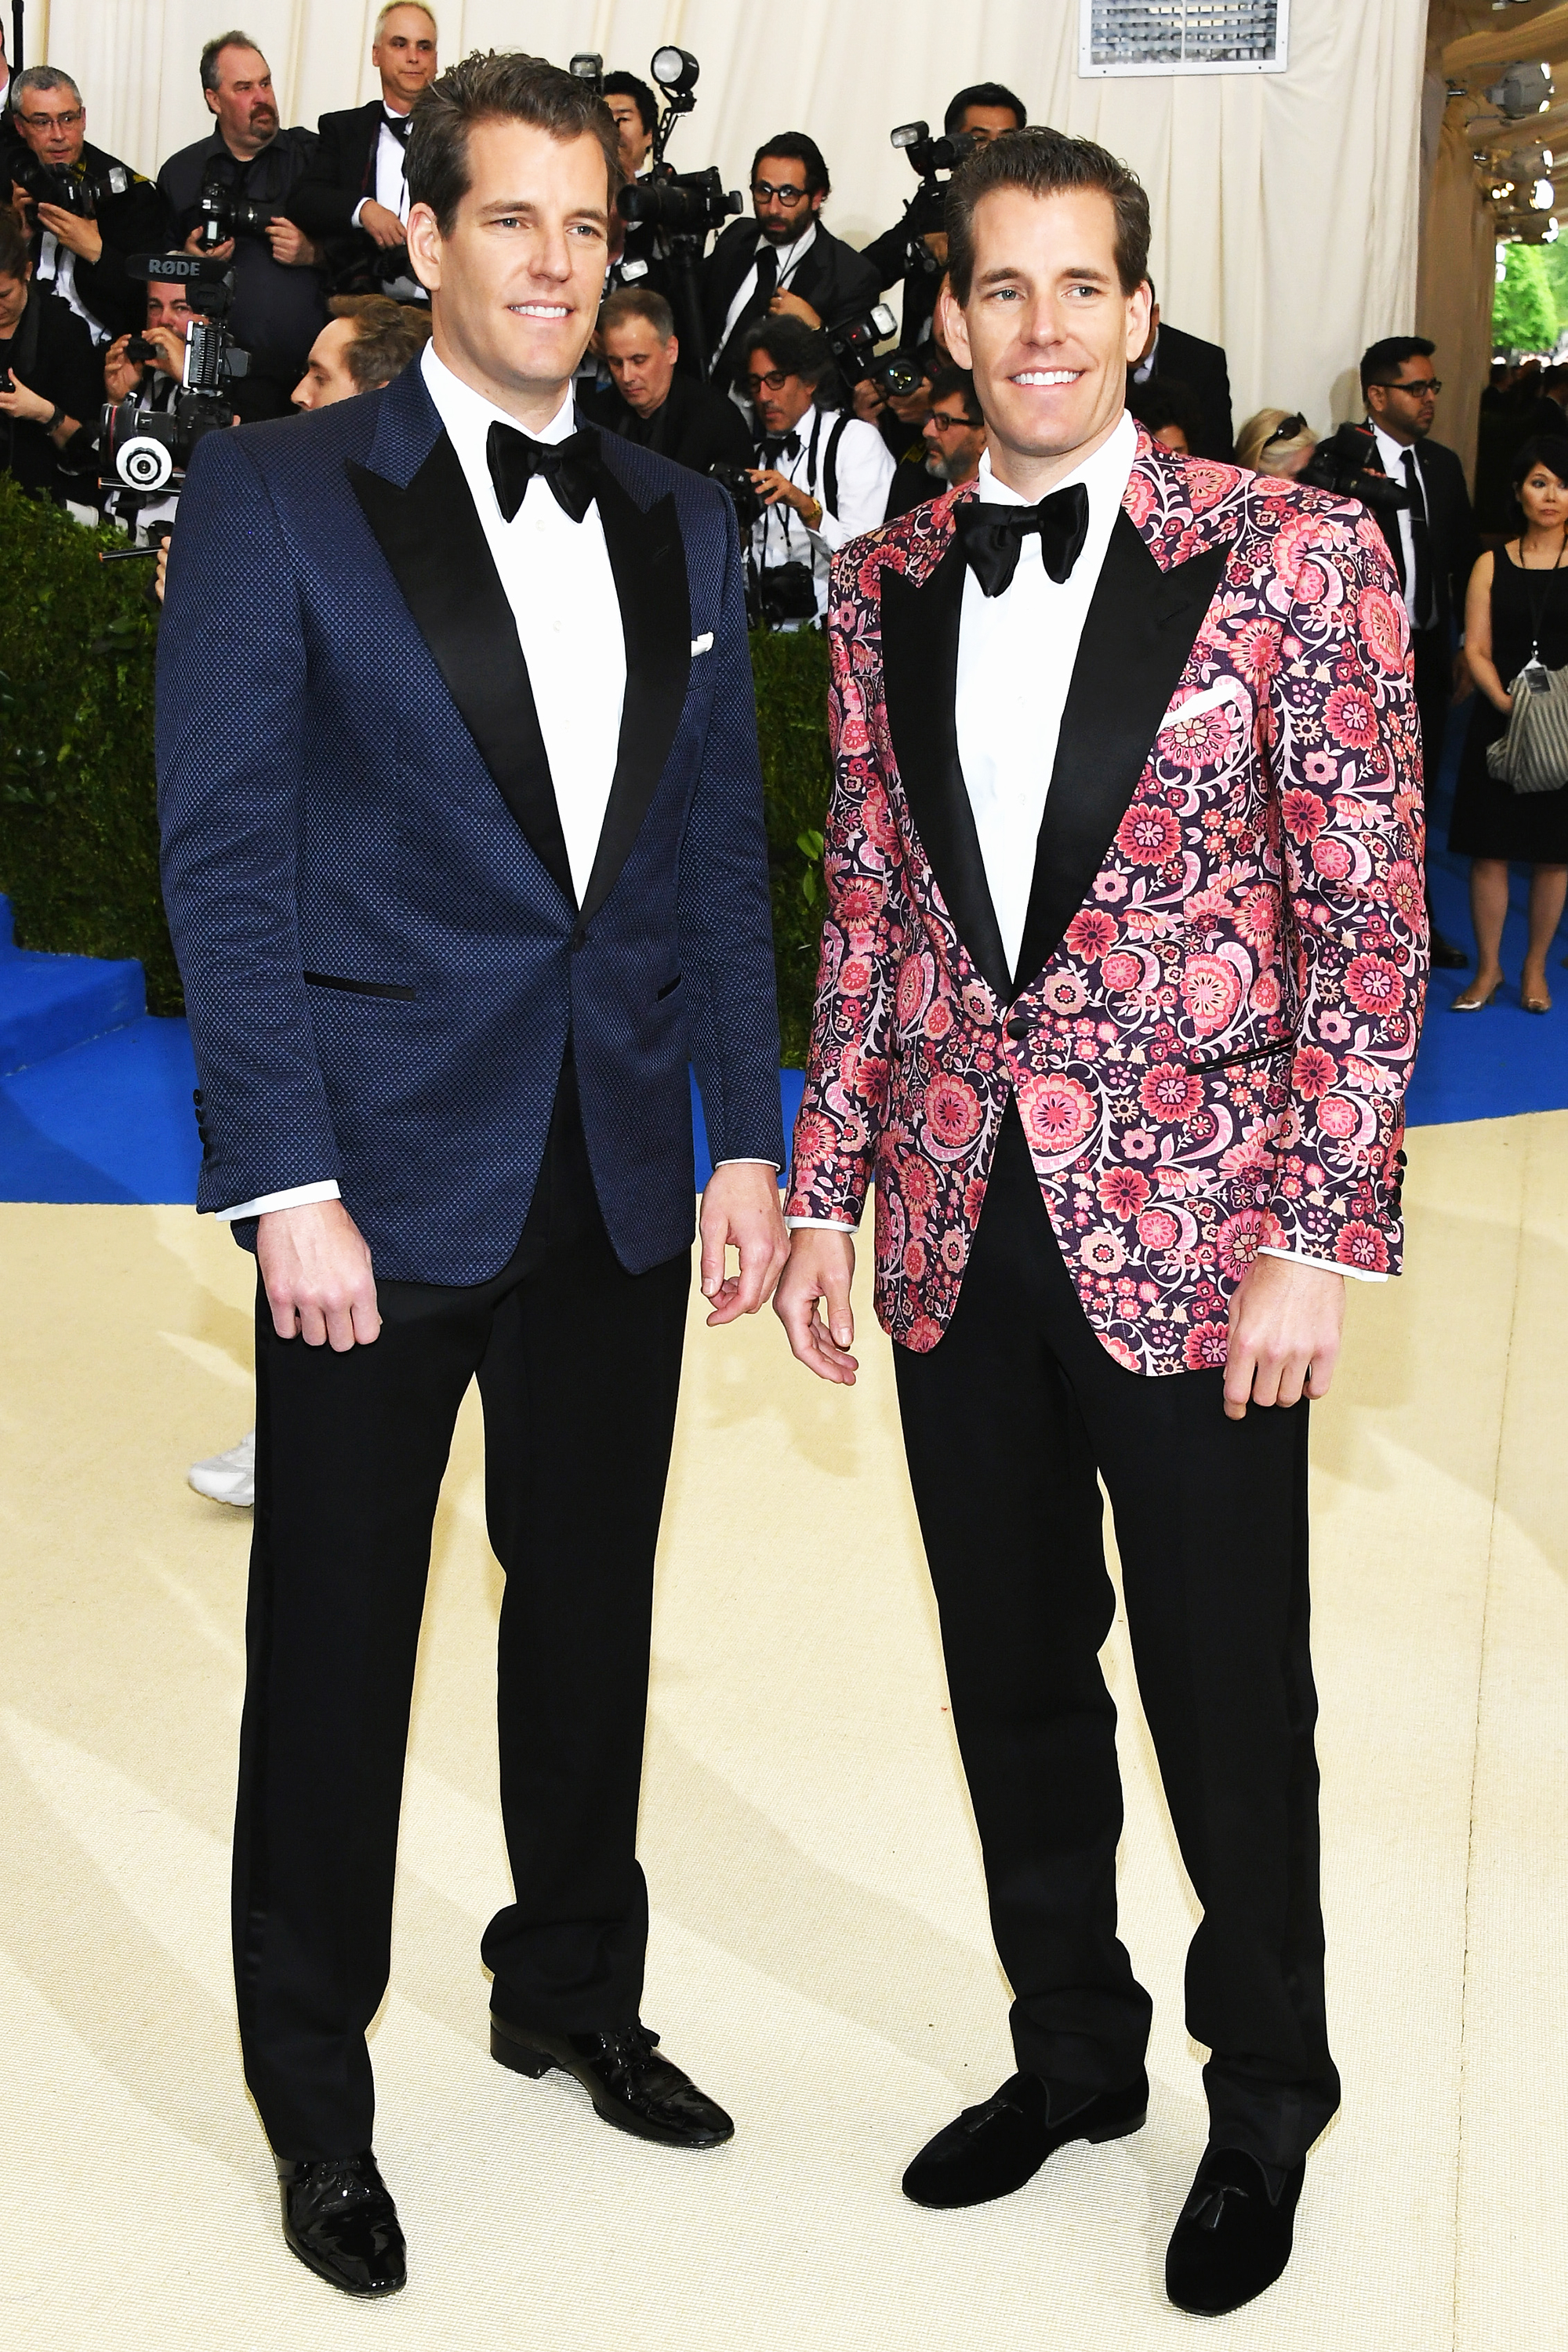 Cameron Winklevoss and Tyler Winklevoss attend The Metropolitan Museum of Art's Costume Institute benefit gala celebrating the opening of the Rei Kawakubo/Comme des Garçons: Art of the In-Between exhibition in New York City, on May 1, 2017.